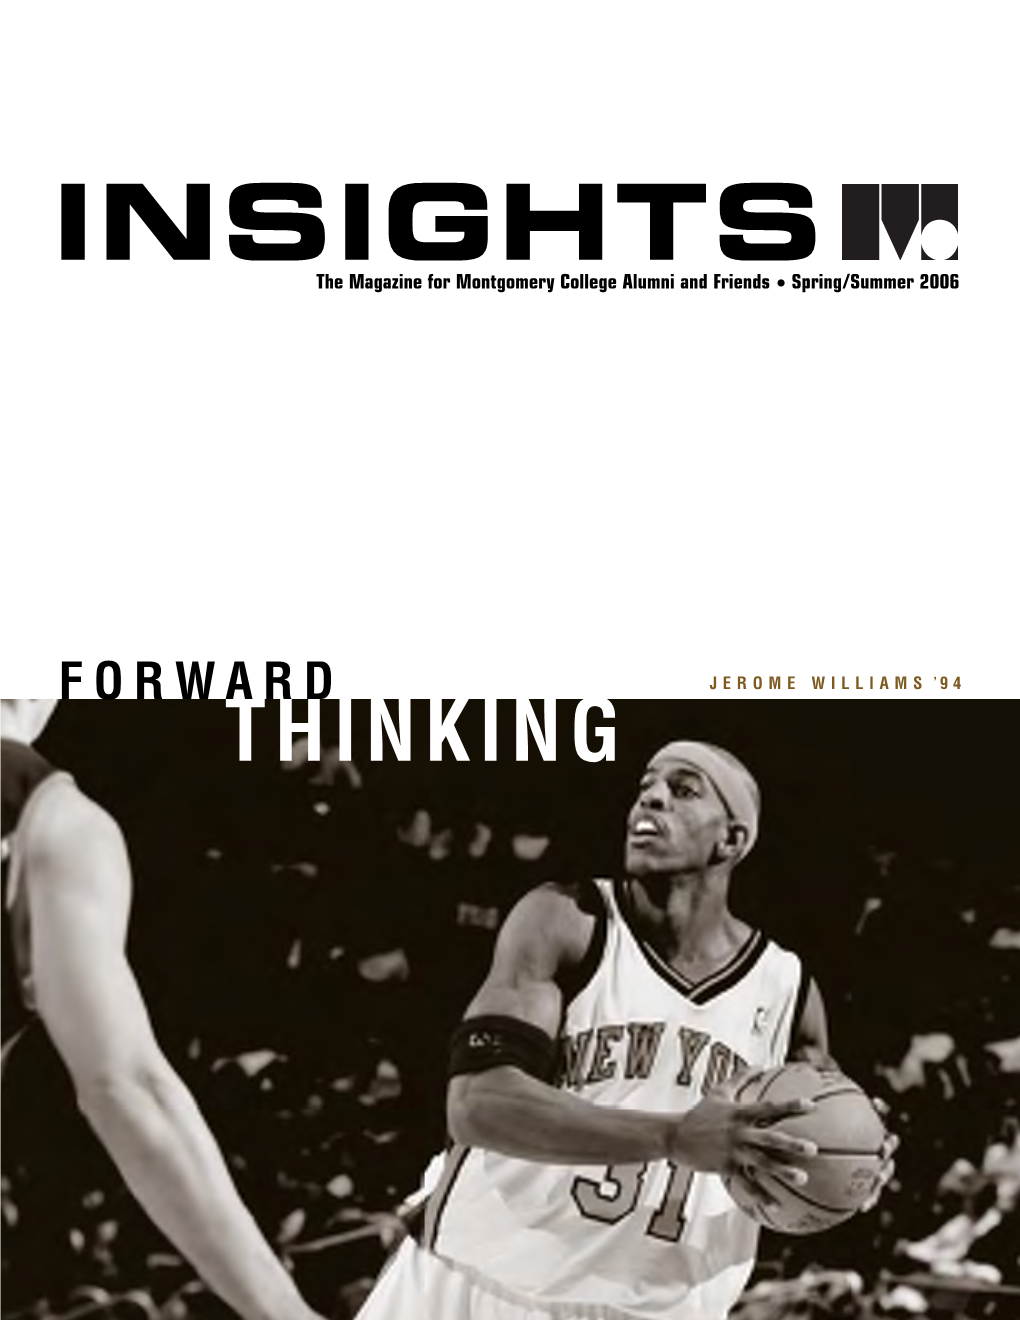 INSIGHTS the Magazine for Montgomery College Alumni and Friends • Spring/Summer 2006